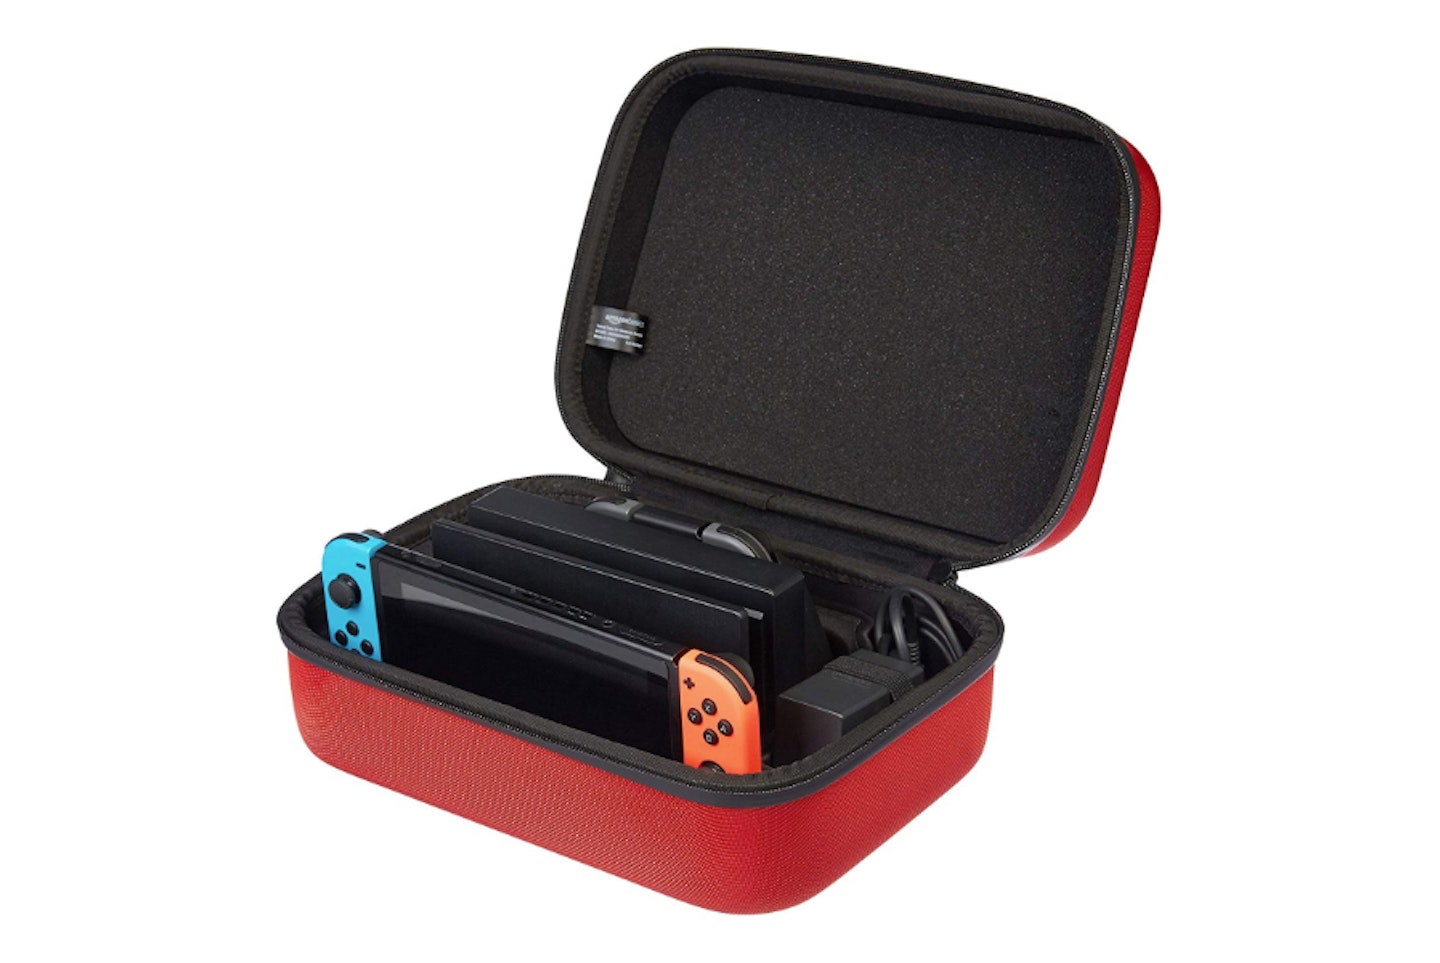 Travel and Storage Case for Nintendo Switch – Red, WAS £16.99 NOW £12.74